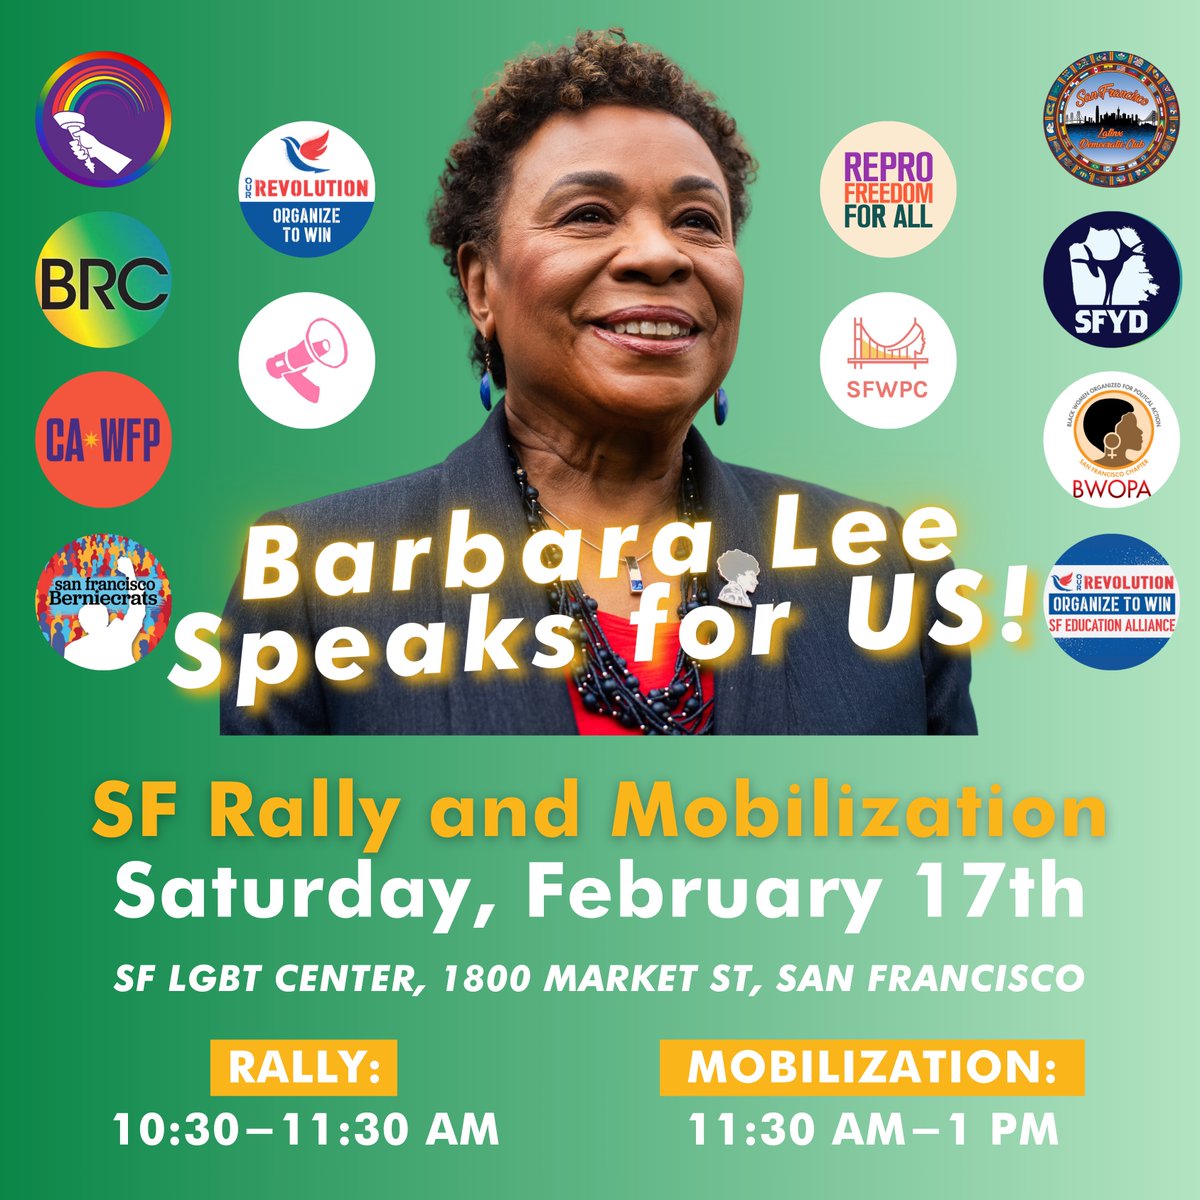 SAN FRANCISCO: Get out the vote on Saturday with @AliceLGBTQDems, @BayardRustin1, @CA_WFP, @sfberniecrats, @OurRevolution, @harveymilkclub, @reproforall, @sfwpc, @SFLatinxDems, @SFYD, @BWOPATILE, @SFEdAlliance, and me at the @SFLGBTCenter! RSVP: mobilize.us/barbaralee/eve…